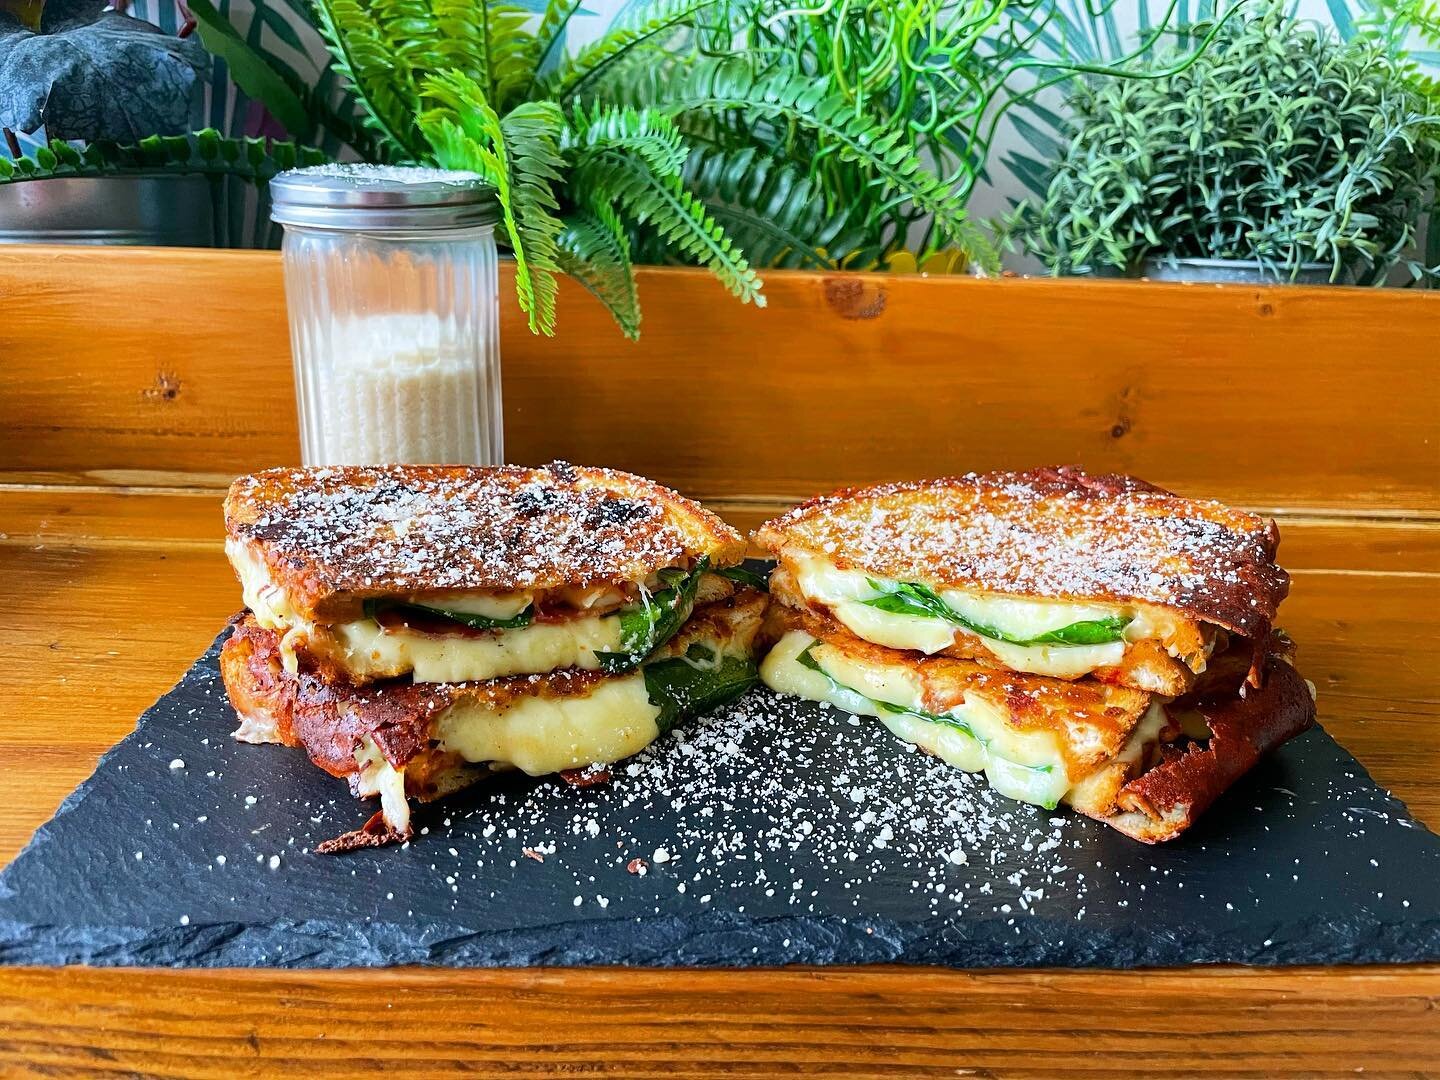 The R&rsquo;n&rsquo;Brie 😍 If Usher lived in the port, he&rsquo;d eat this every day!
.
Chilli jam, Brie, baby spinach and our cheese blend. 
A real hit, probably more so than confessions part 2 ..